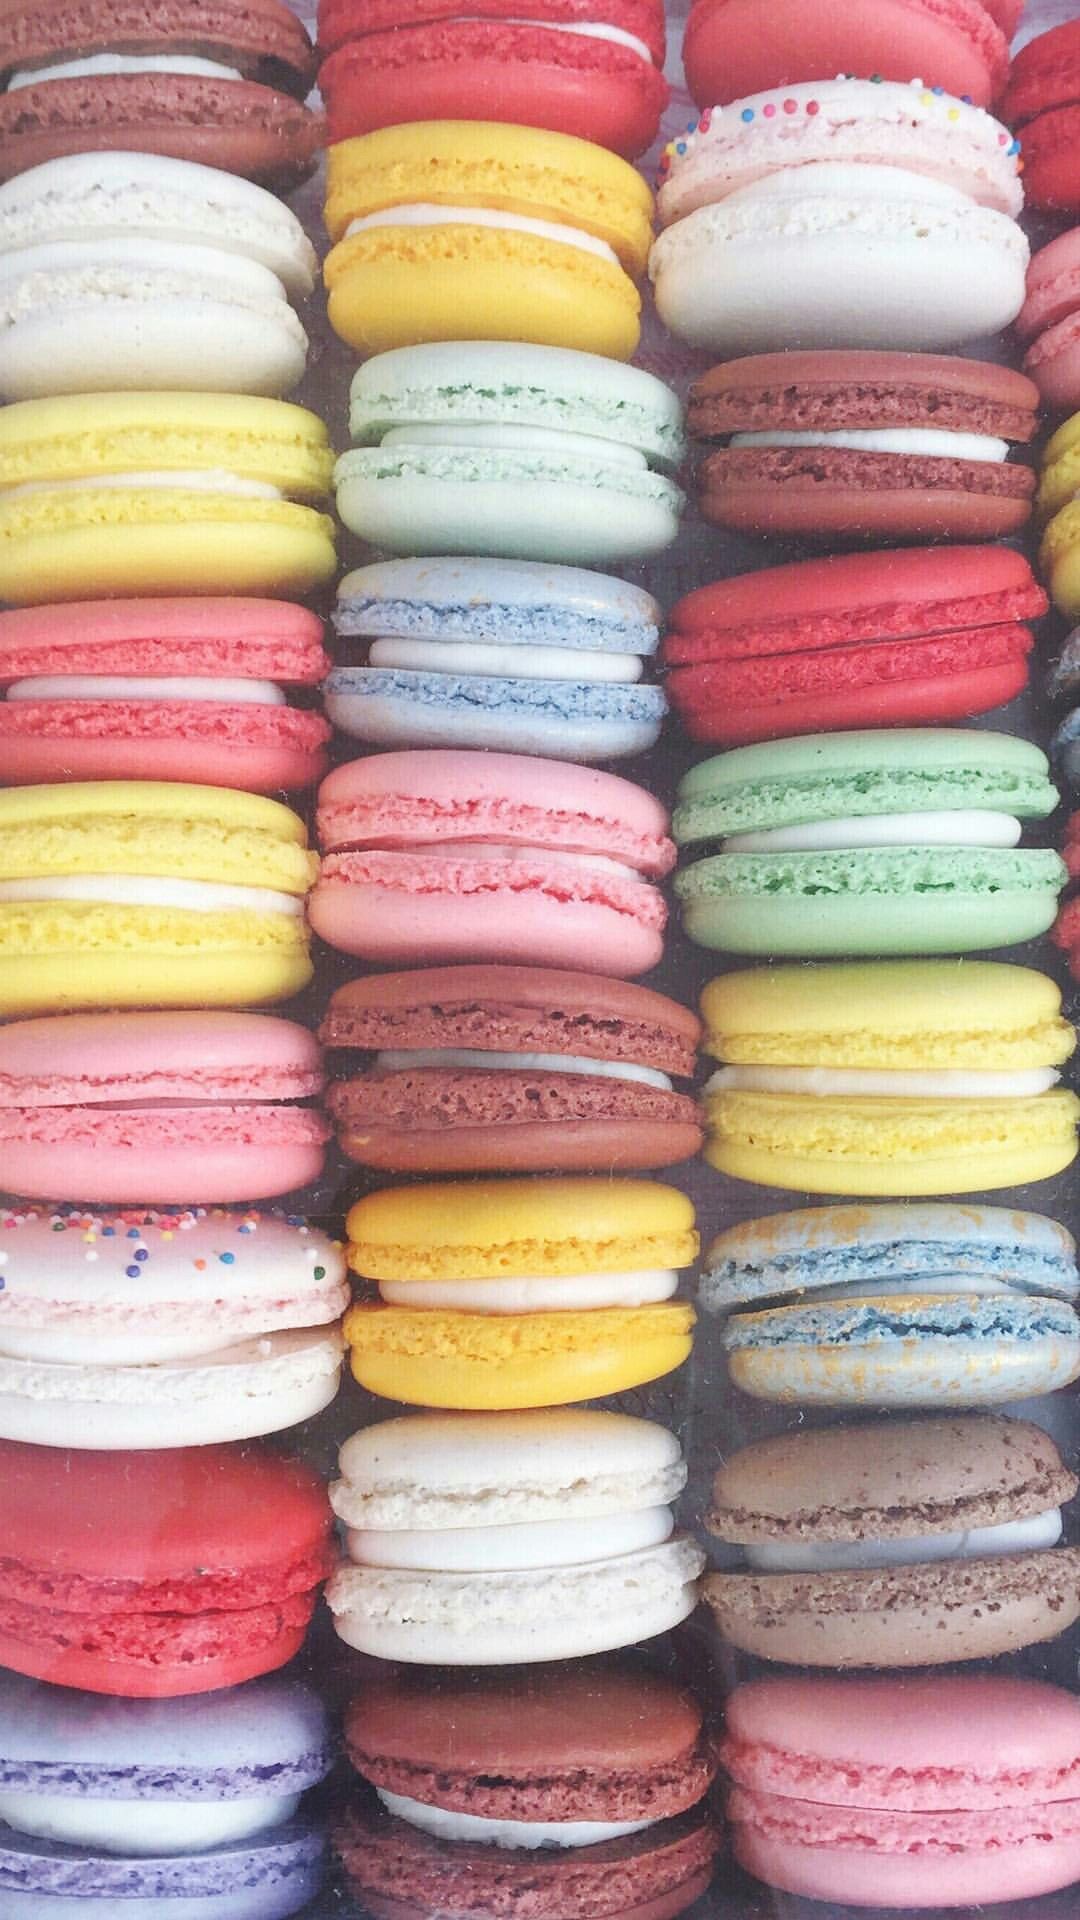 color #colorful #pastel #aesthetic #wallpaper #pretty #sweet #background #macarons #candy #foodie #food. Macaron wallpaper, Food wallpaper, Candy background